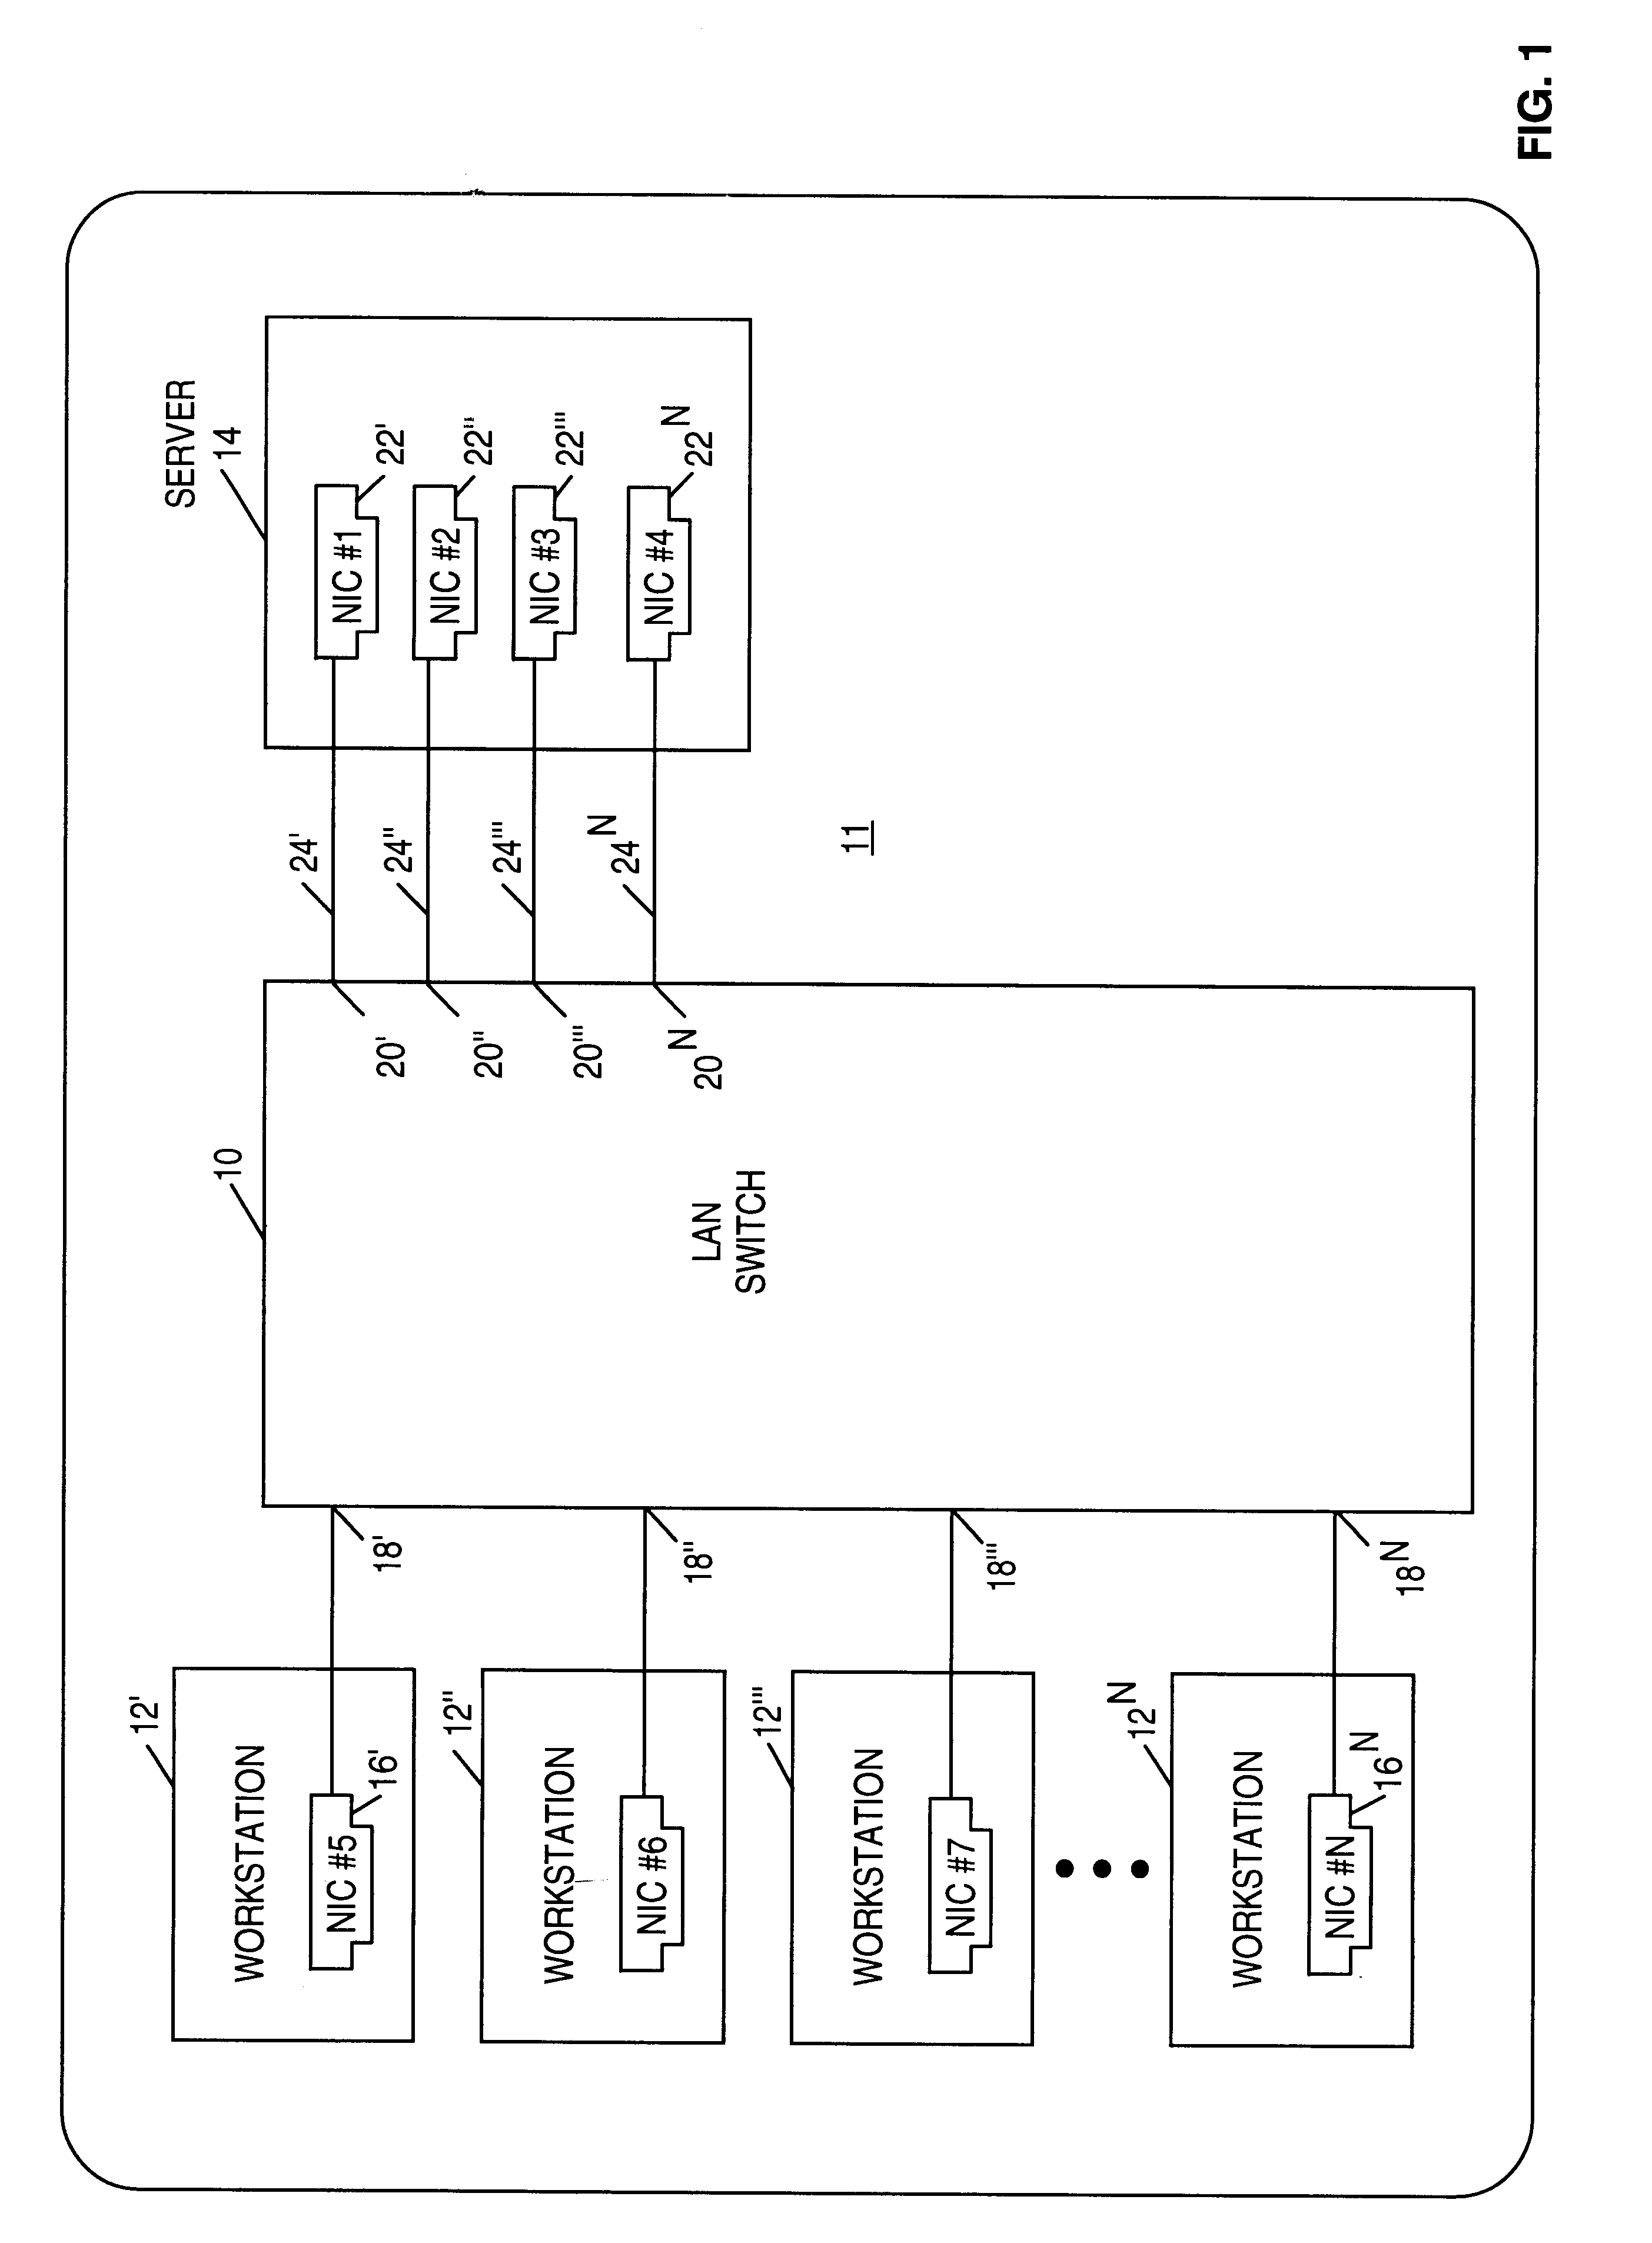 Network server having dynamic load balancing of messages in both inbound and outbound directions